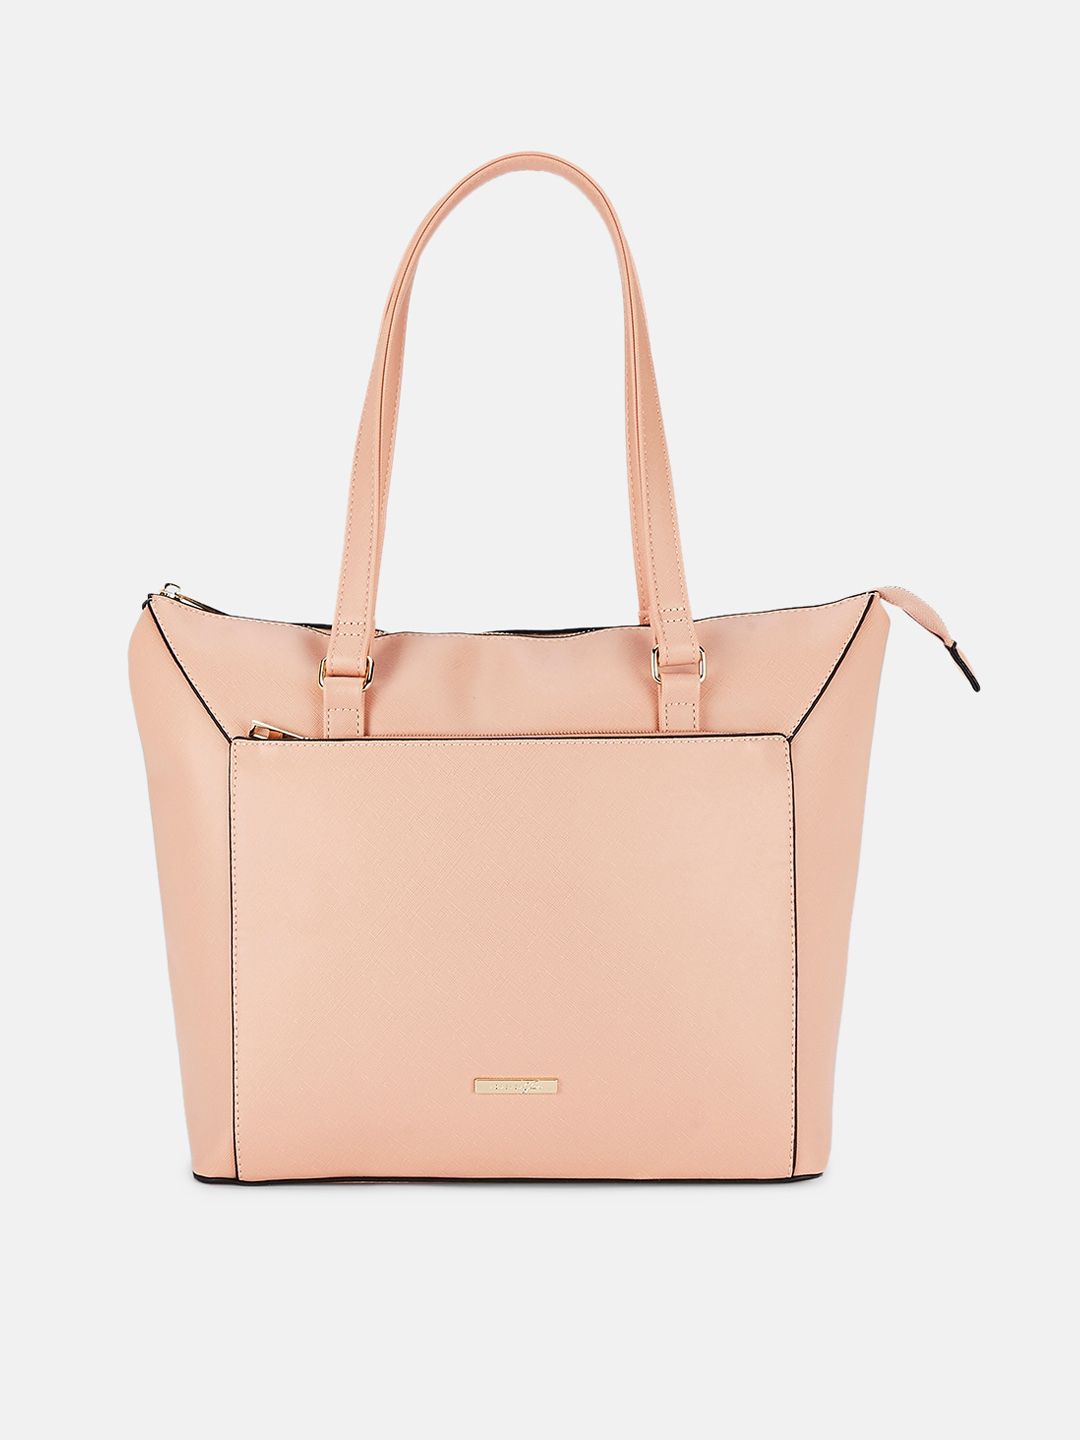 Forever Glam by Pantaloons Peach-Coloured Textured PU Oversized Structured Tote Bag Price in India